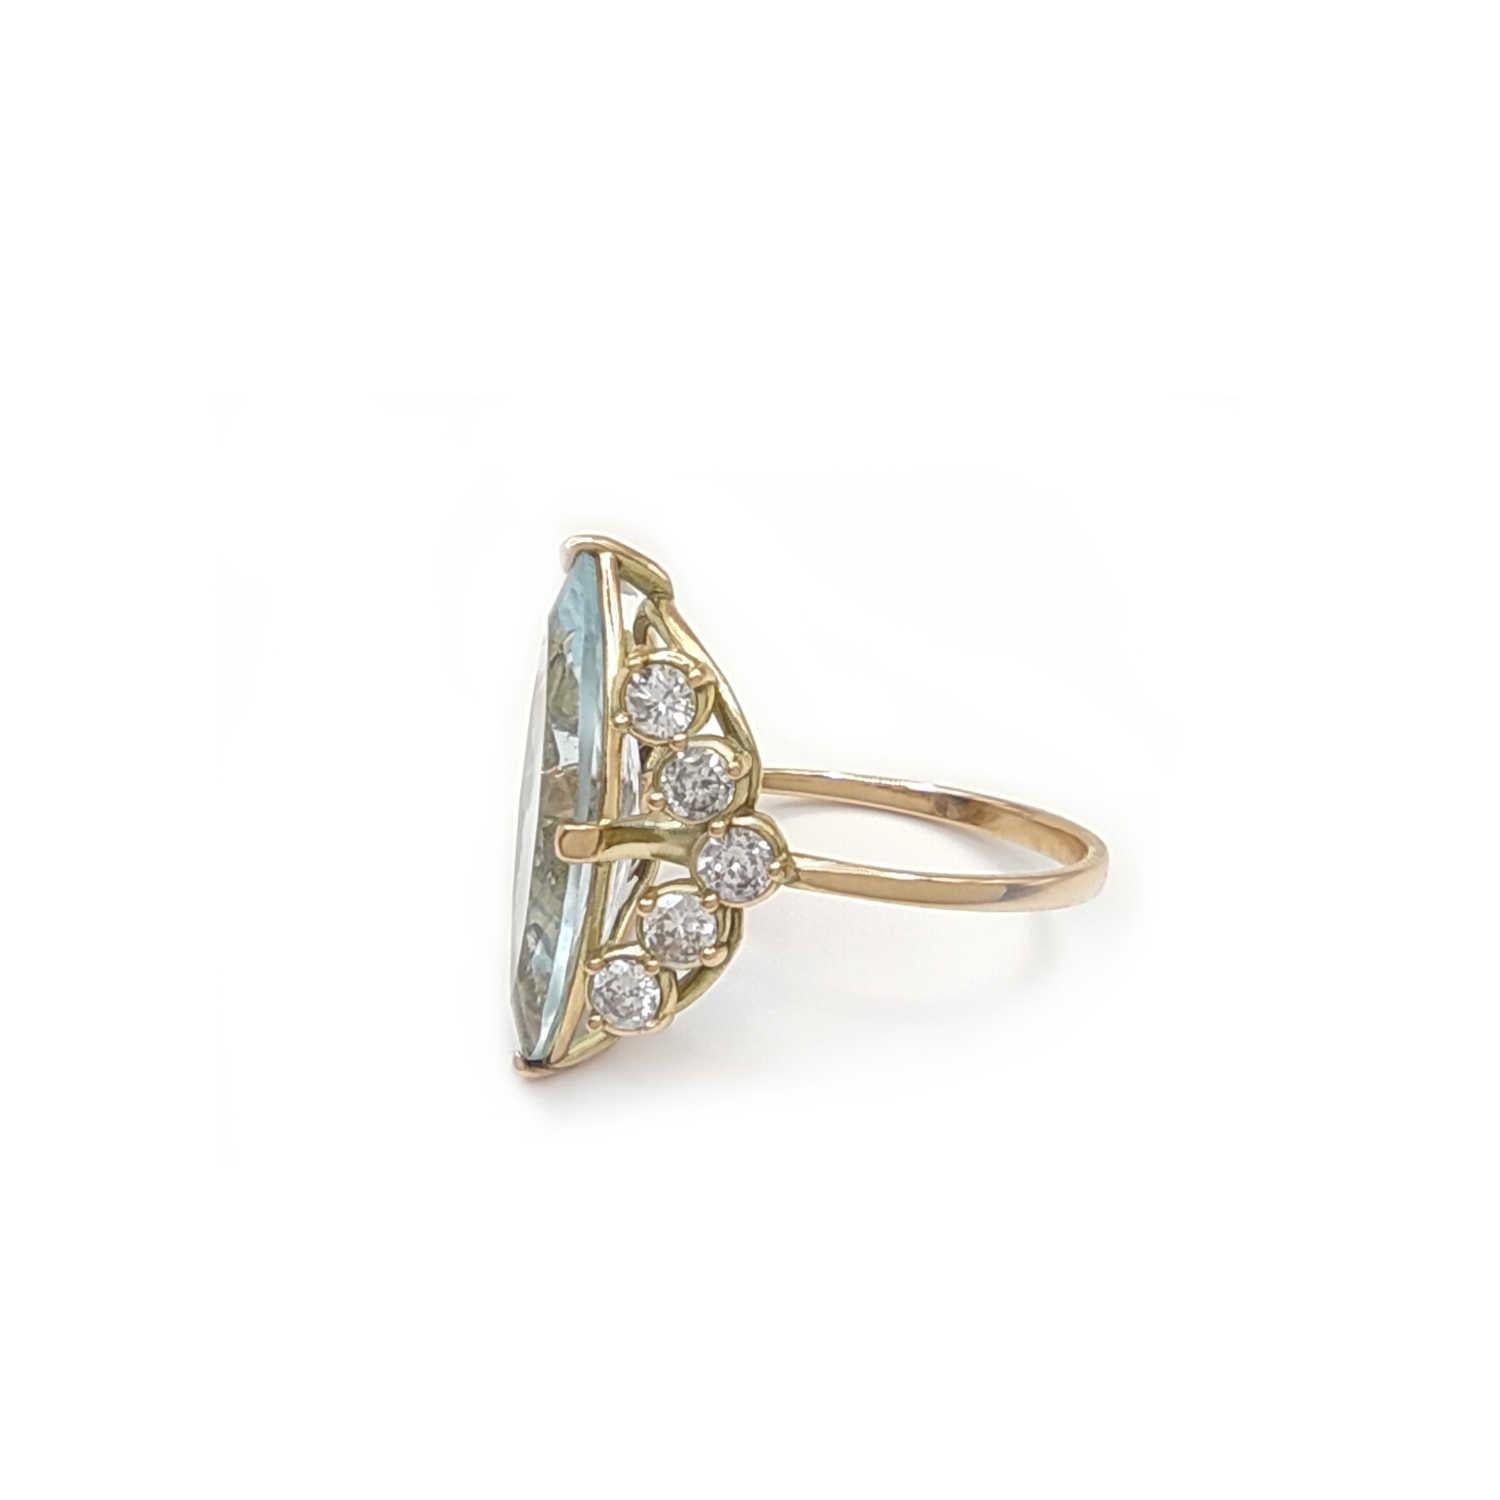 Certified 3.60-Carat Aquamarine and 0.67-Carat Diamond Cocktail Ring in 14K Gold For Sale 4